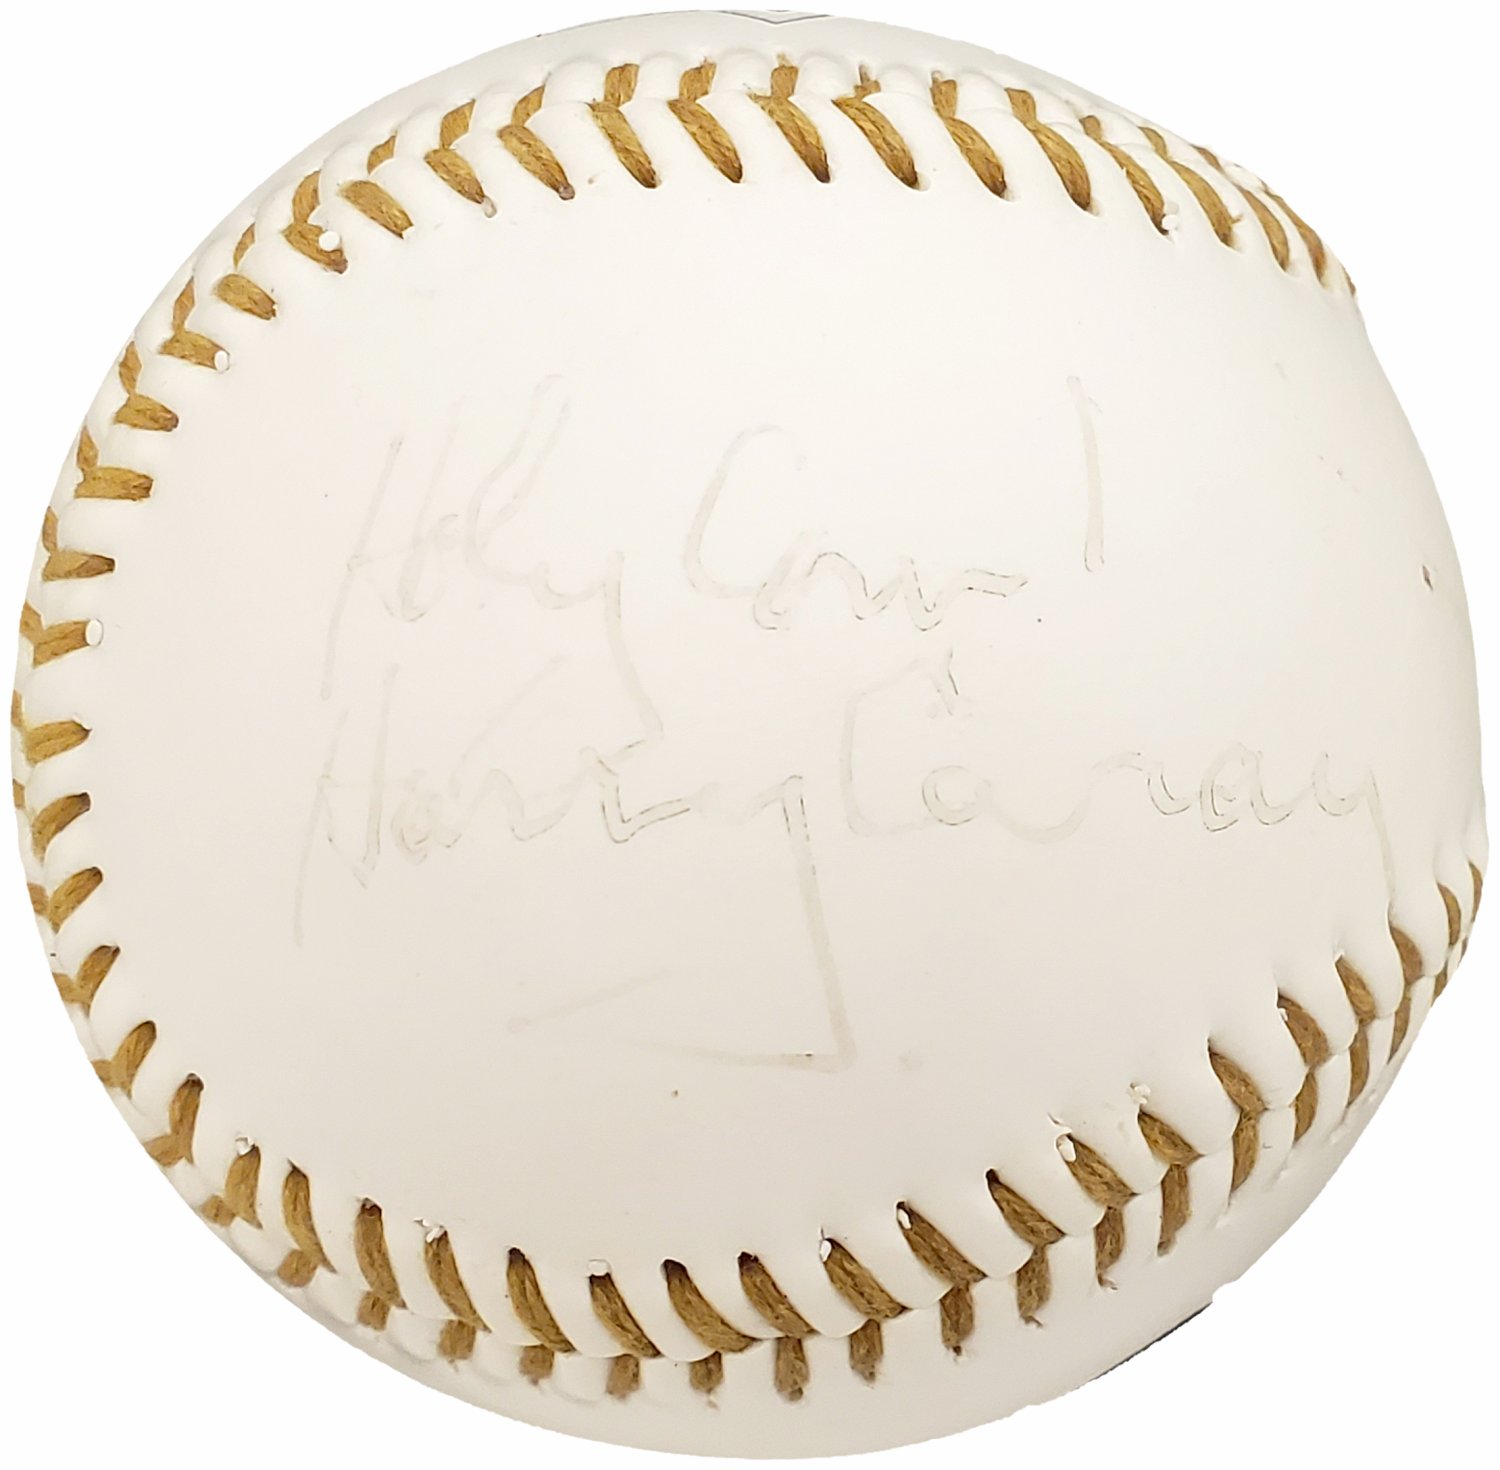 Harry Caray Autographed Signed Official Fotoball Baseball Chicago